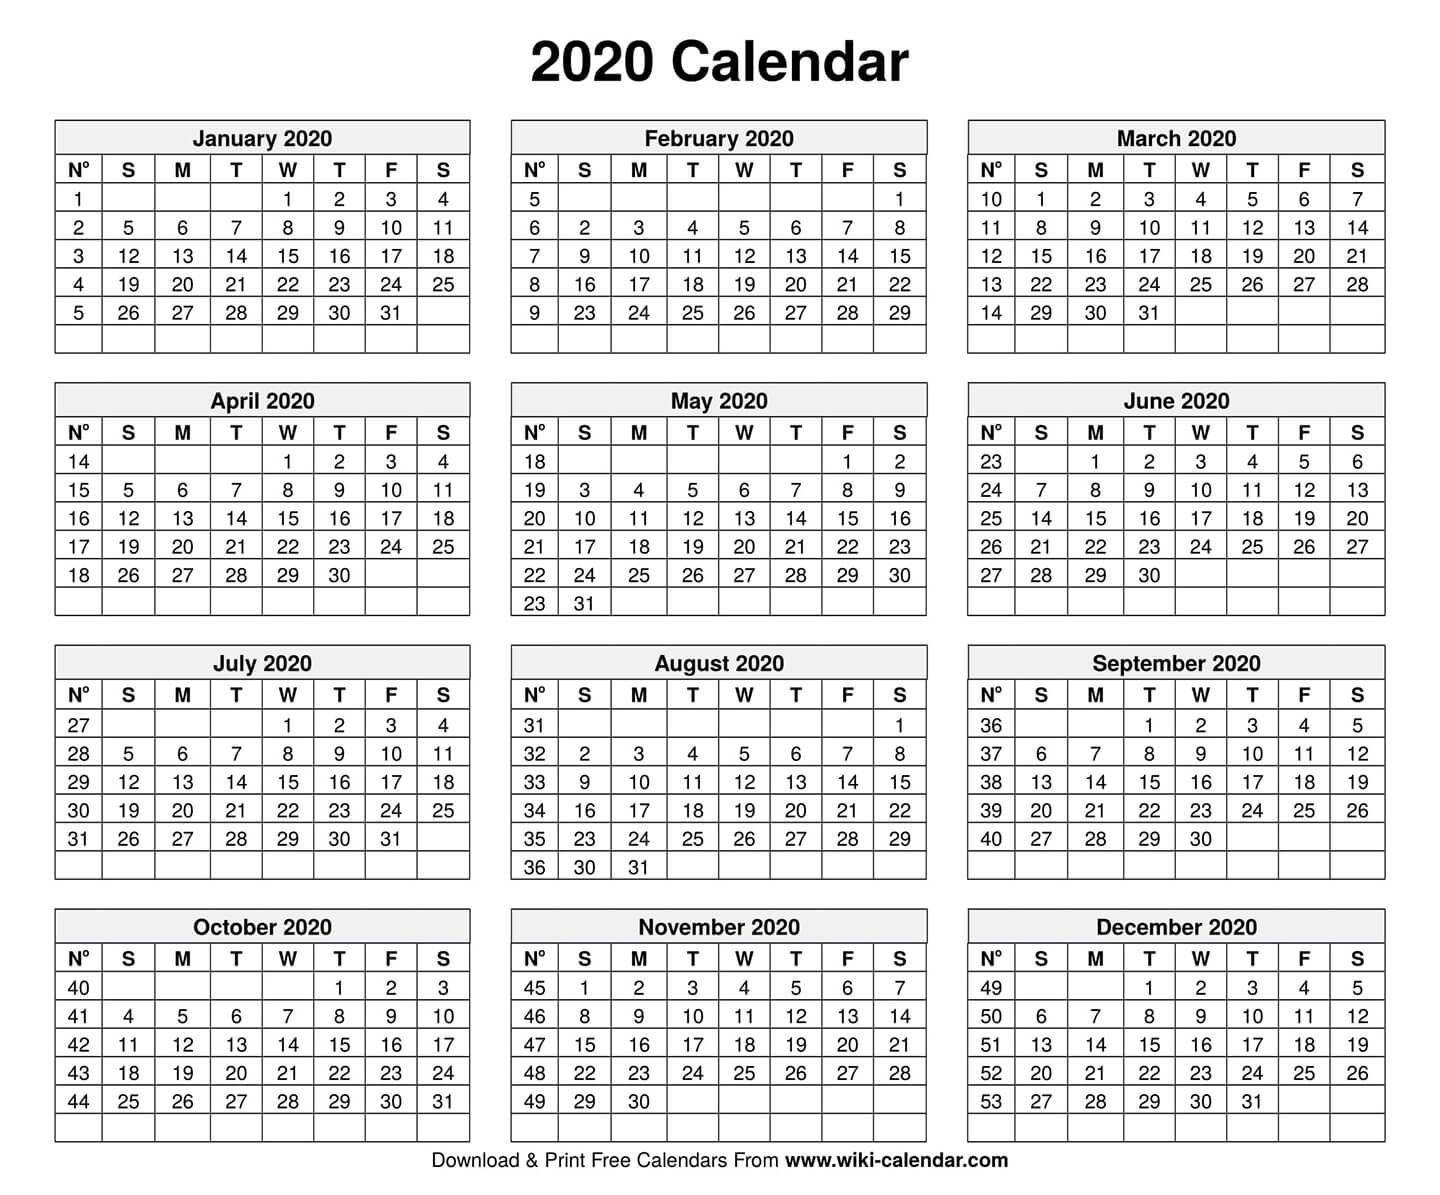 2020 Calendar Printable With Numbered Days | Monthly Dashing 2020 Calender With Numbered Days